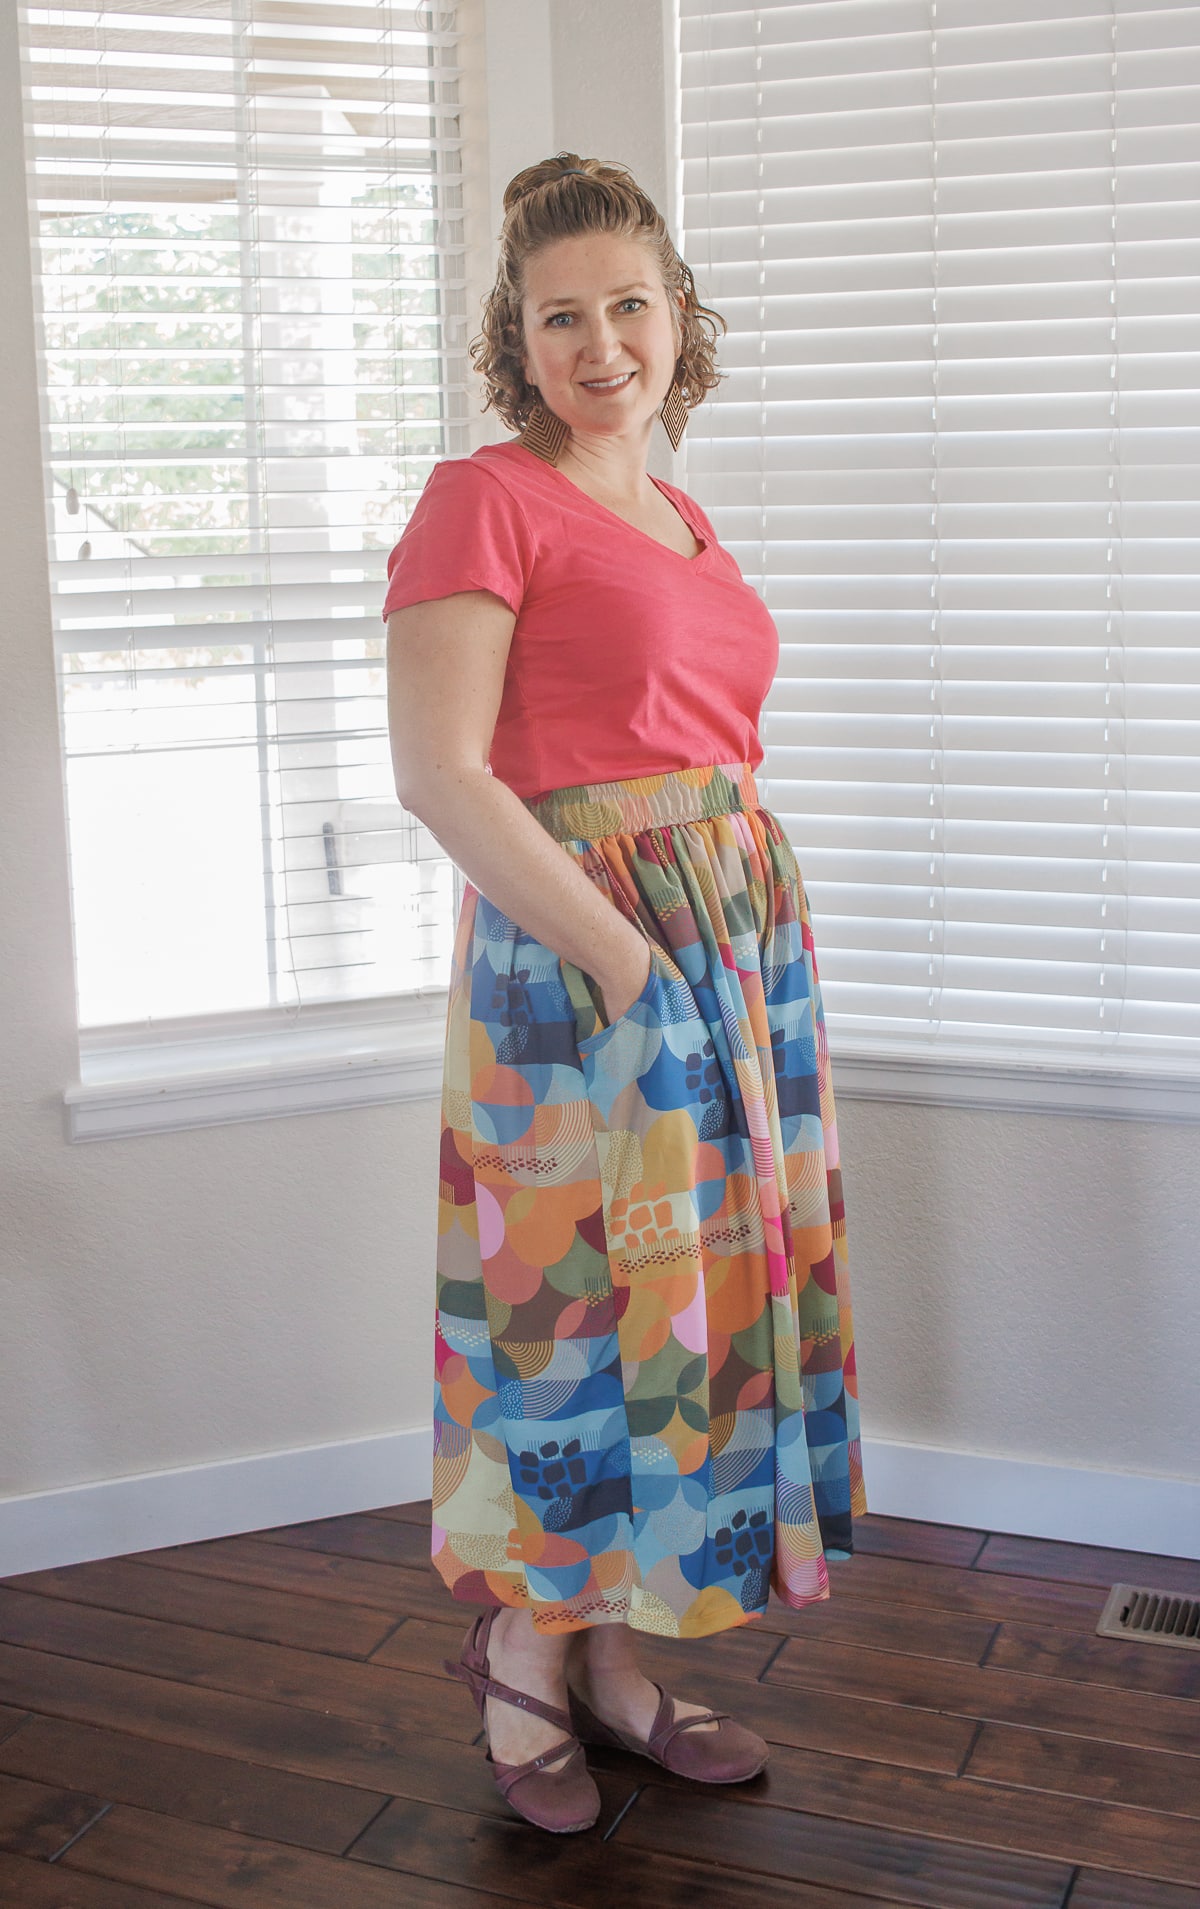 cute skirt with pockets - tutorial for how to sew a skirt